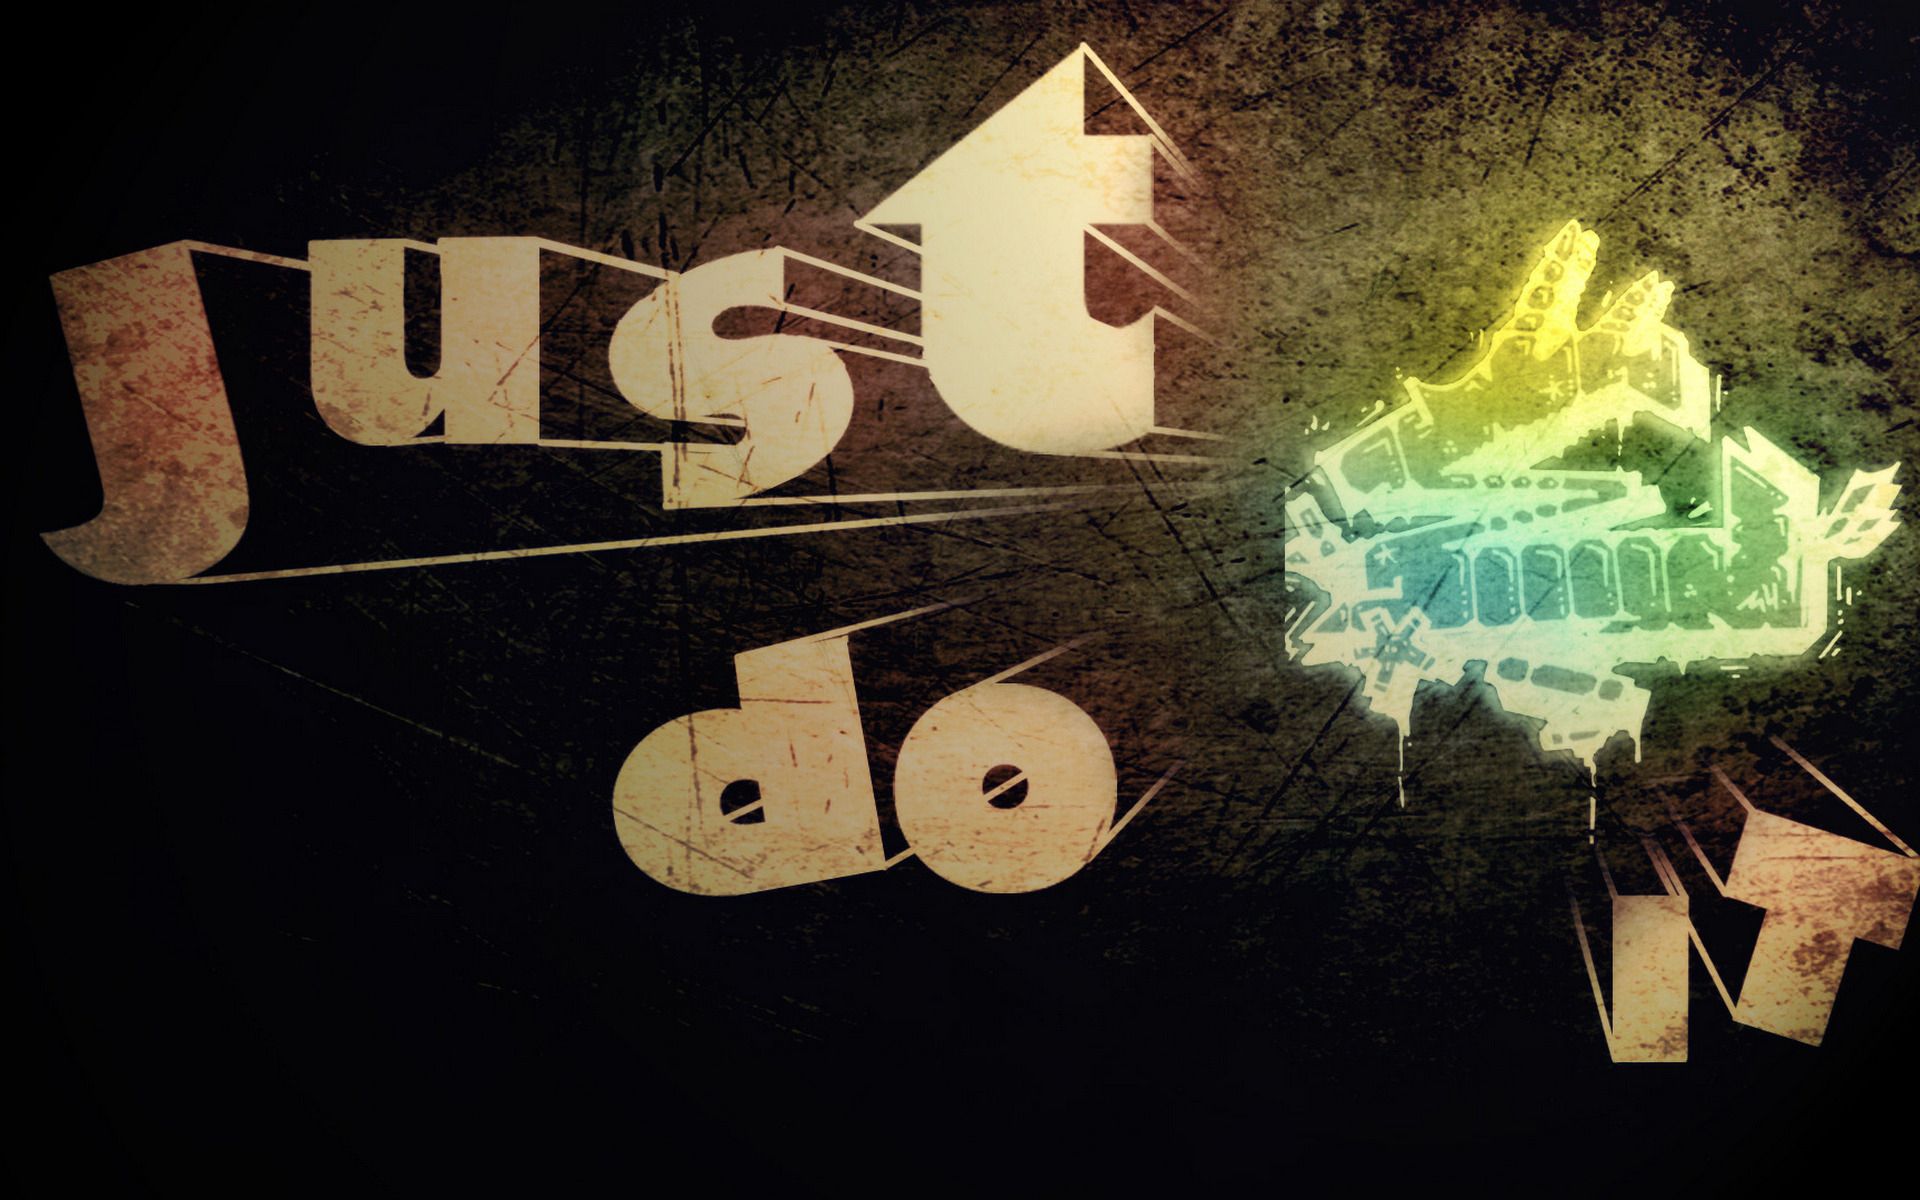 Just do it high definition 1080p wallpapers55.com - Best